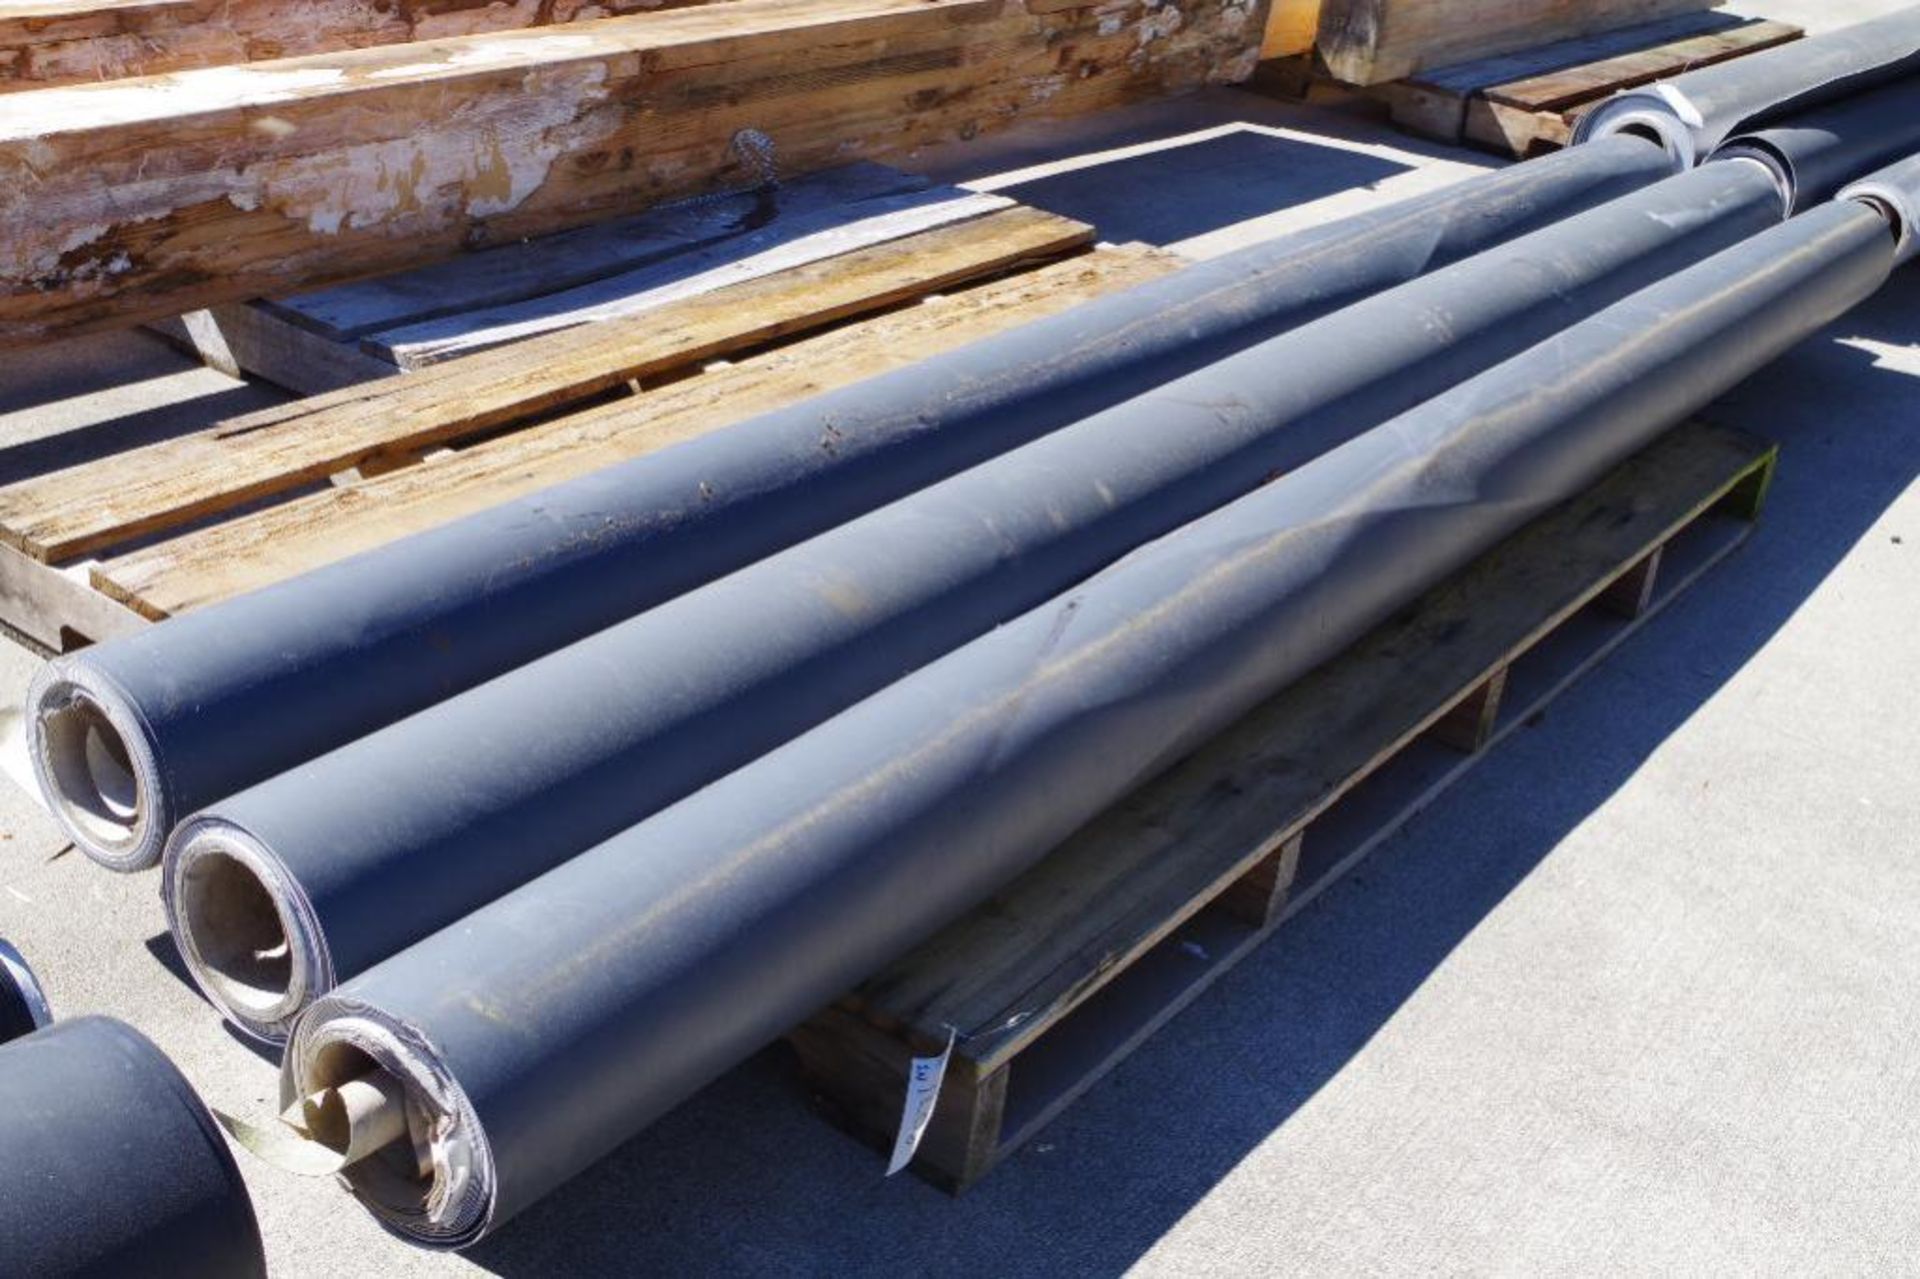 (3) Partial Rolls of 10' Roofing Membrane Material